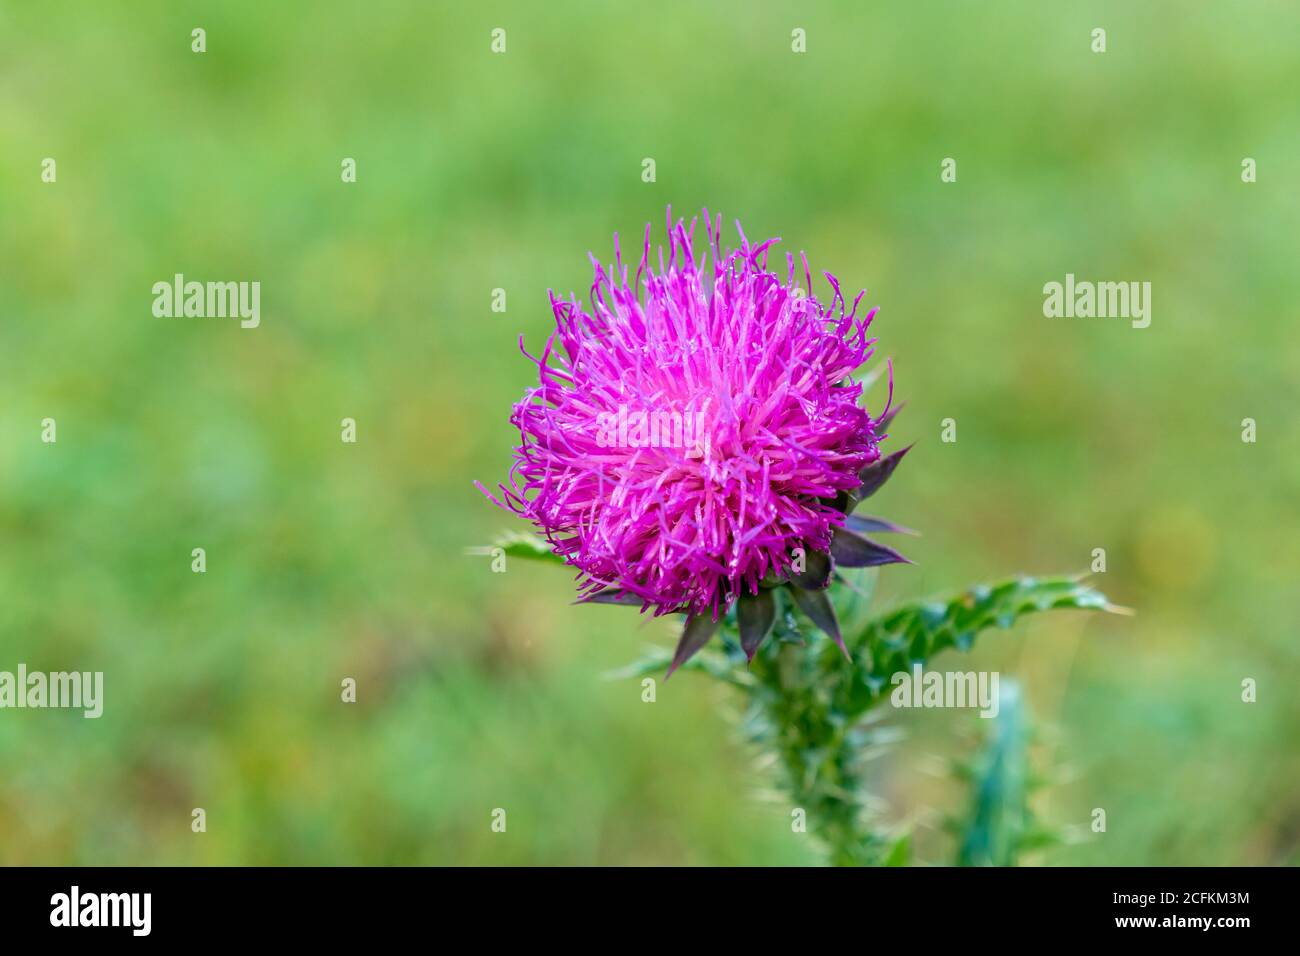 Close-up bright pink flower of melancholy thistle on a green natural background Stock Photo